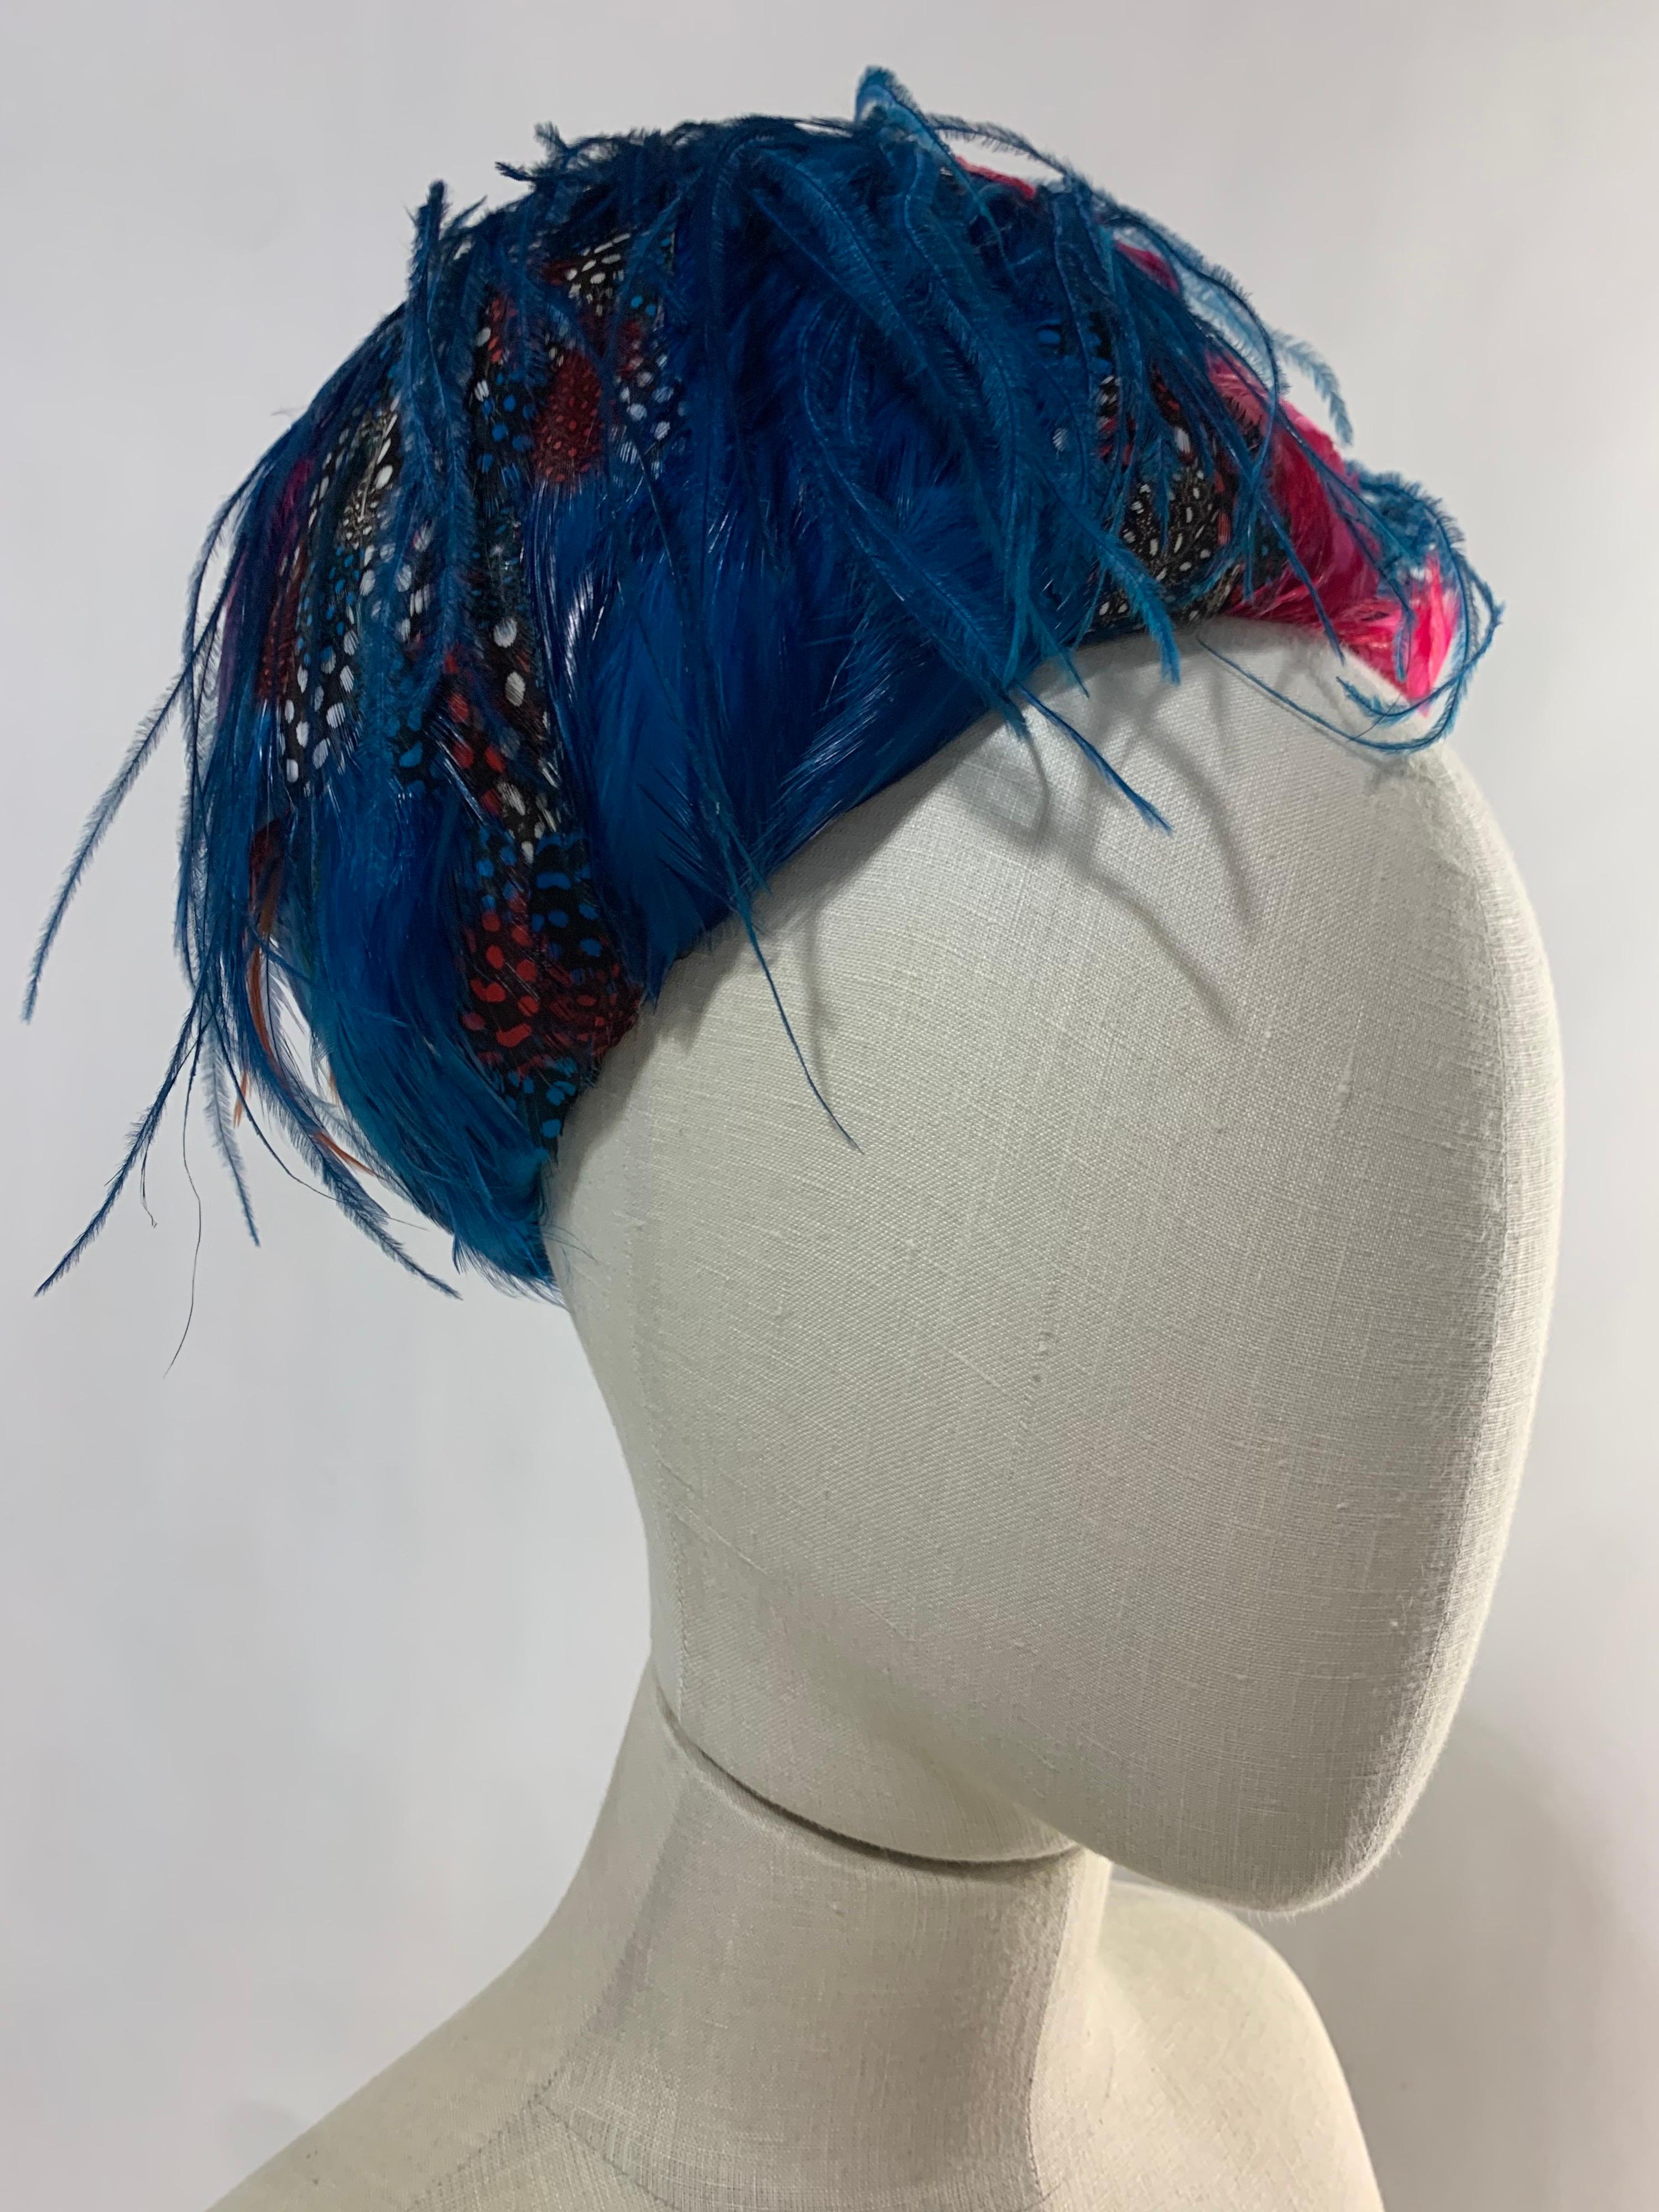 A beautiful 1960s Christian Dior turquoise ostrich and multicolor feather bubble-shaped hat. To be worn at crown of head and attached with combs or pins. Gorgeous! One size fits all.